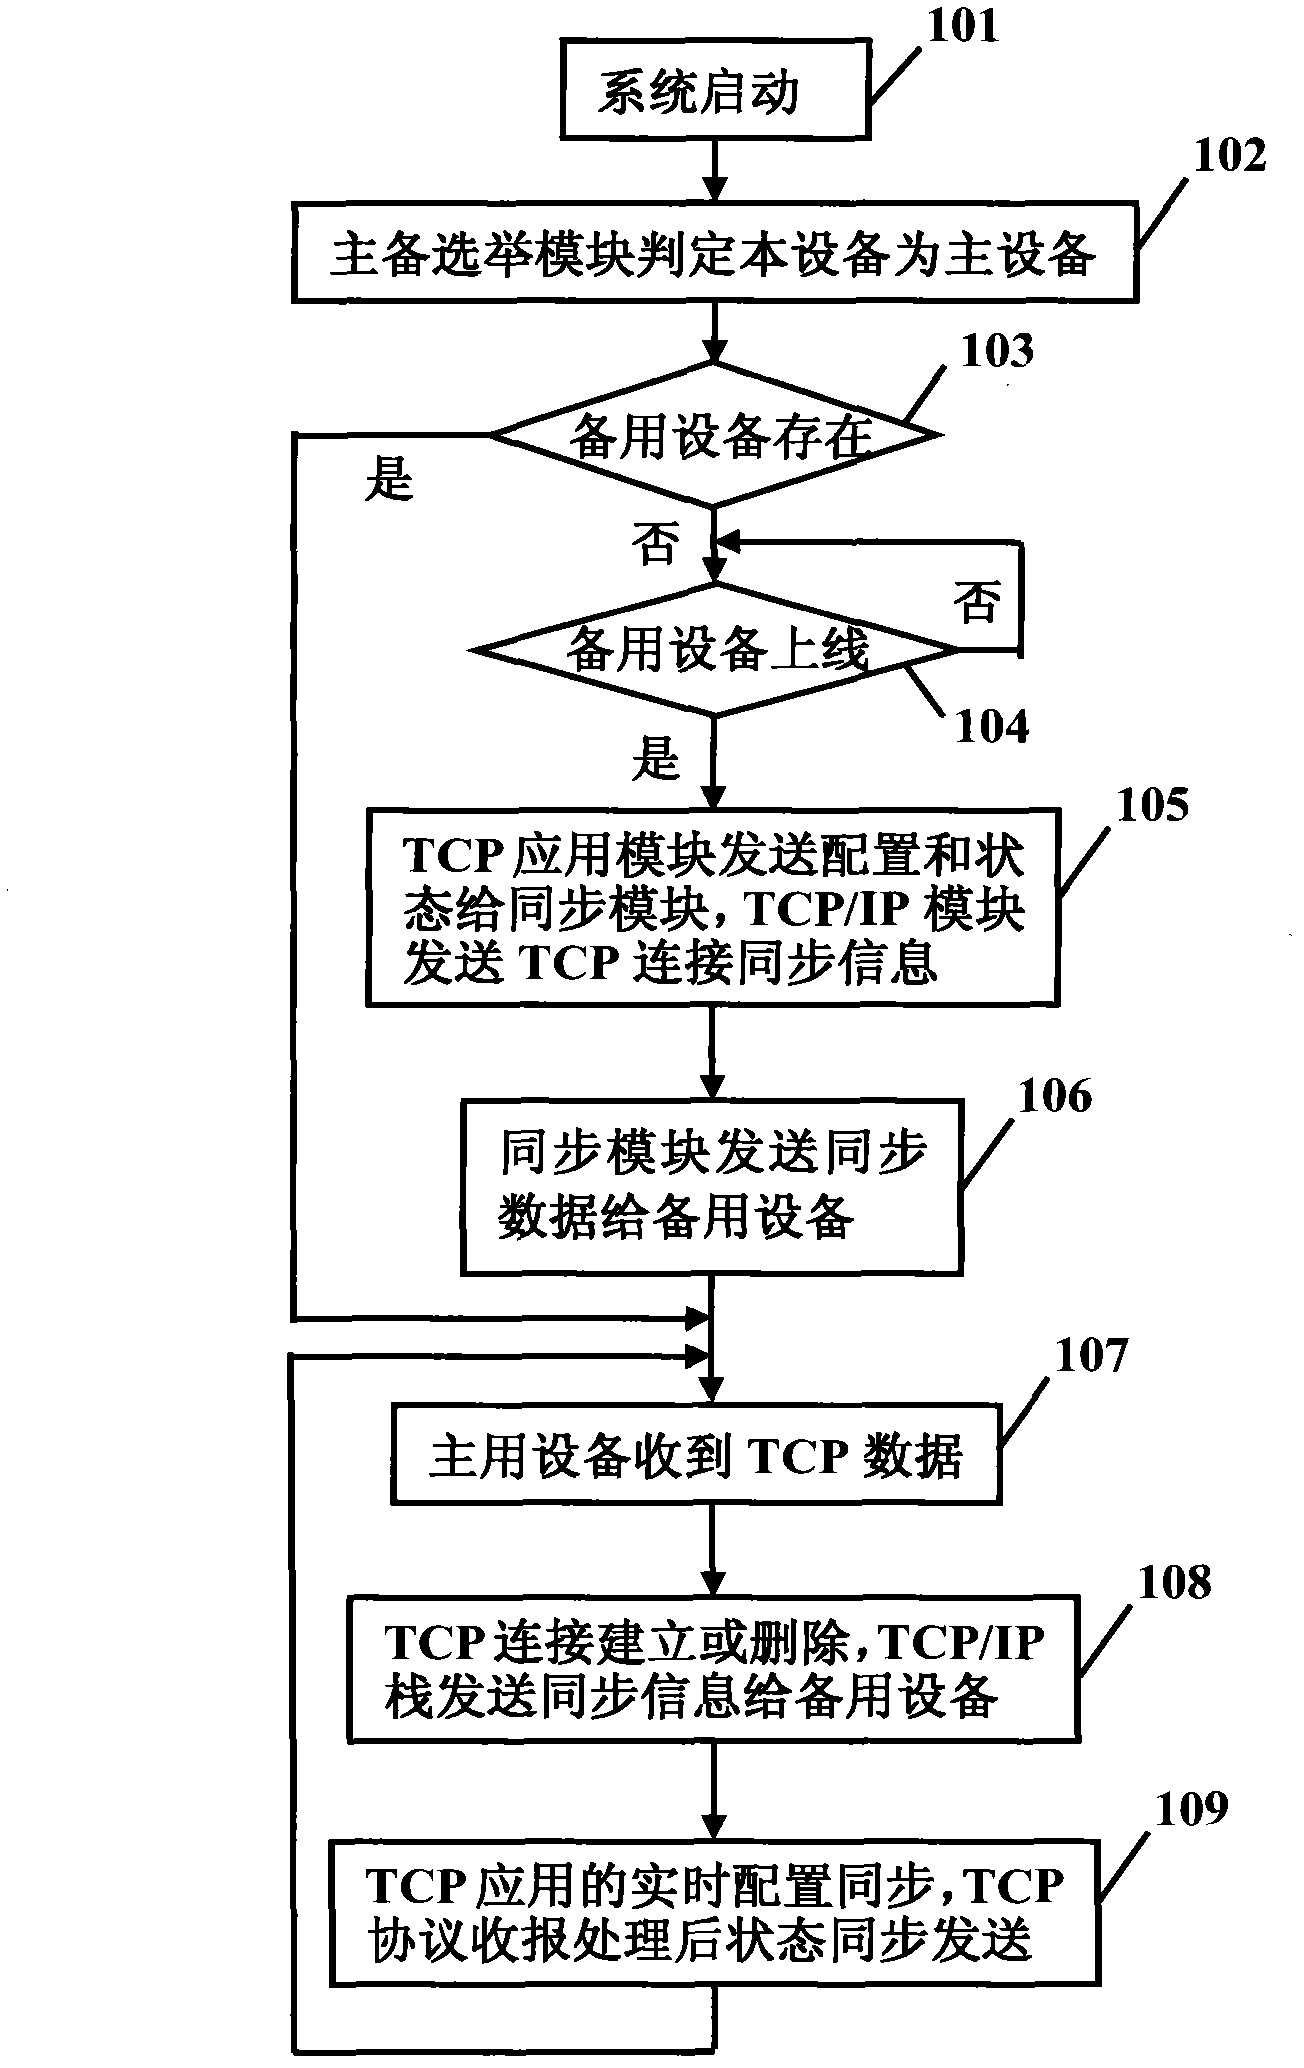 Method for realizing TCP (transmission control protocol) application main and standby changeover